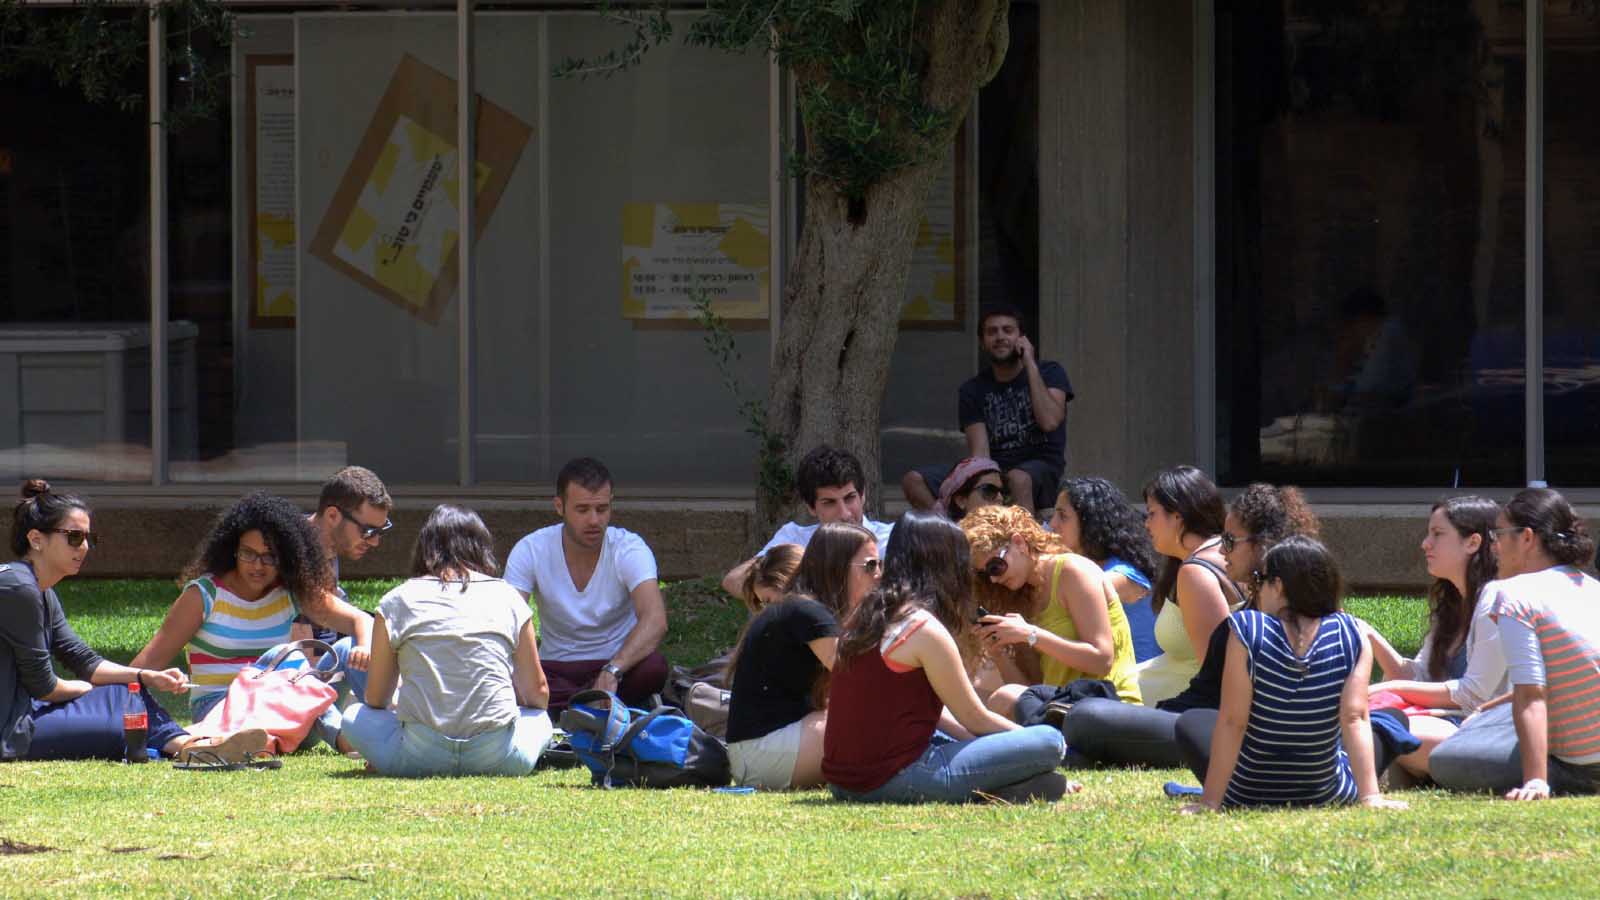 Students at Ben-Gurion University. &quot;The academic experience does not amount to just studying, and campus life has a unique meaning and value.&quot; (Photo Archive: Dudu Grinshpan / Flash 90)